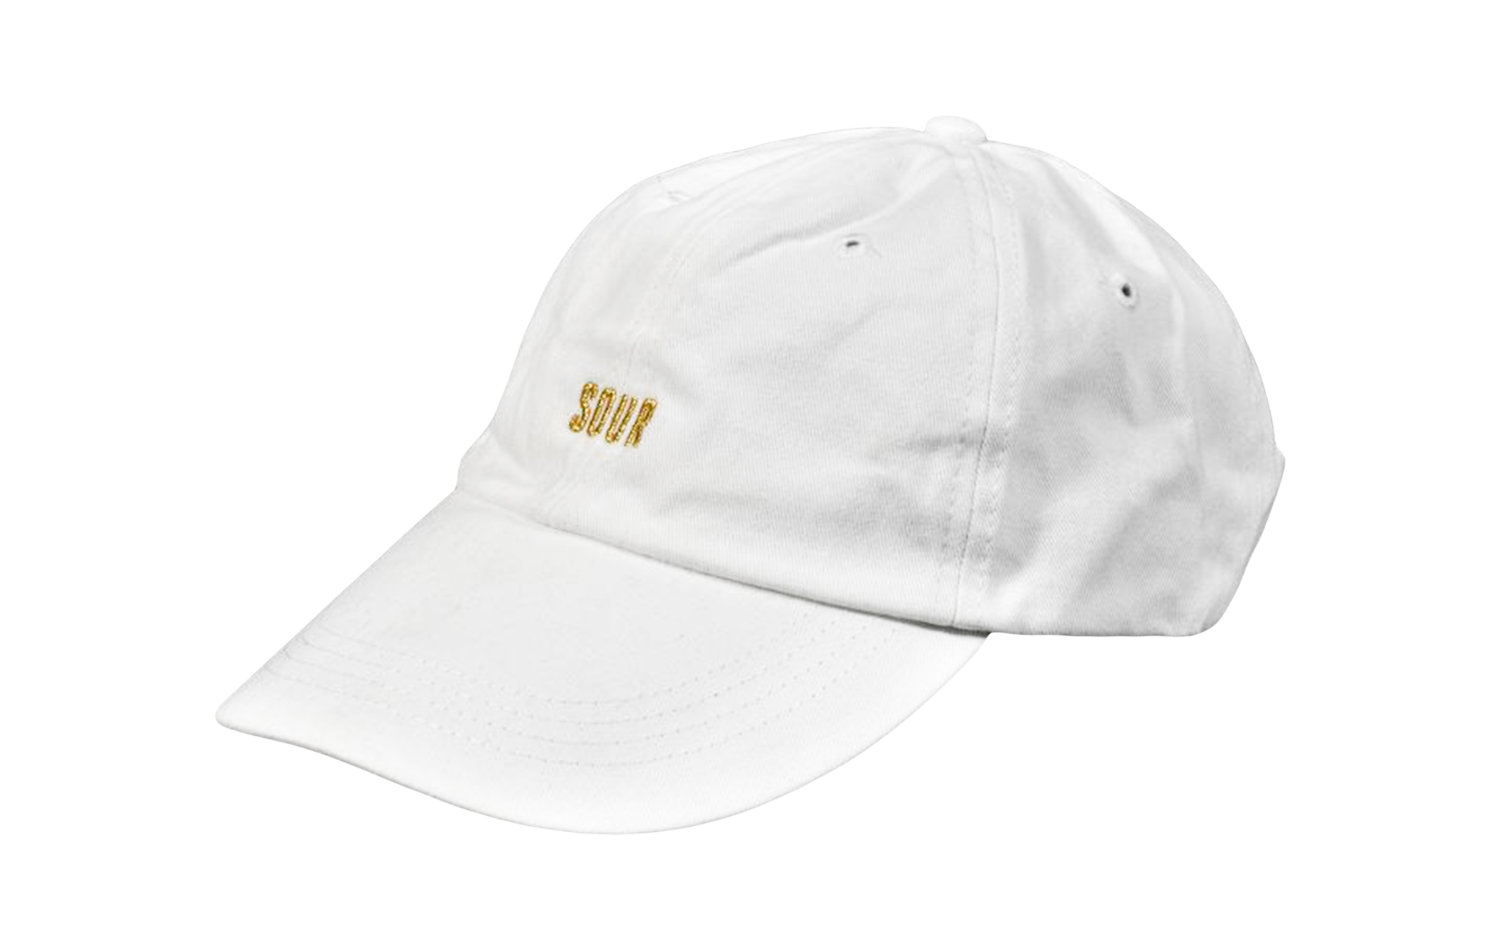 Sour Gold Embroidered Cap ()